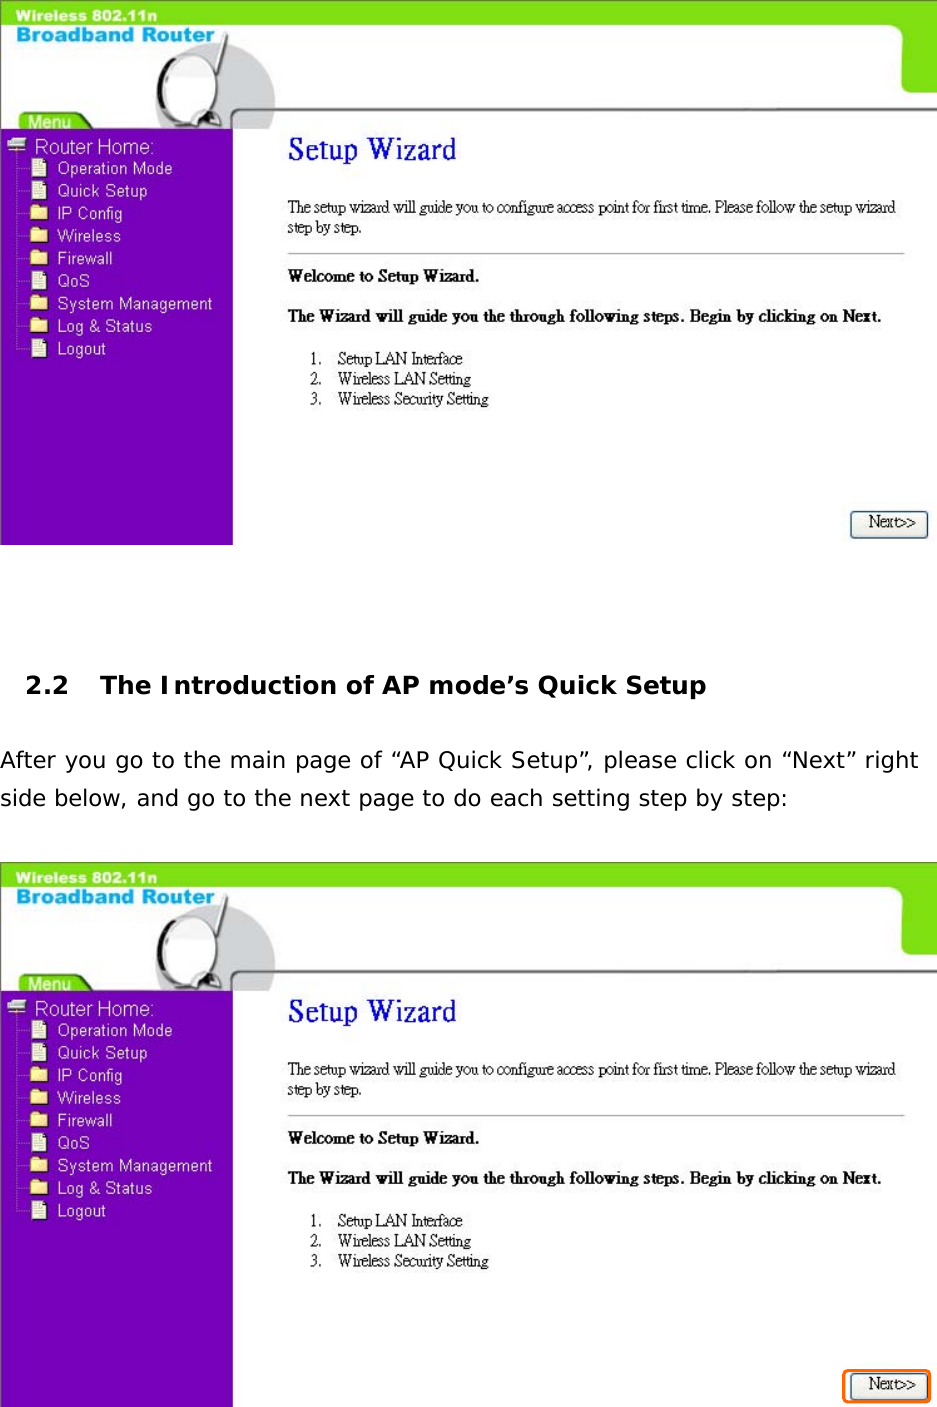     2.2  The Introduction of AP mode’s Quick Setup  After you go to the main page of “AP Quick Setup”, please click on “Next” right side below, and go to the next page to do each setting step by step:   